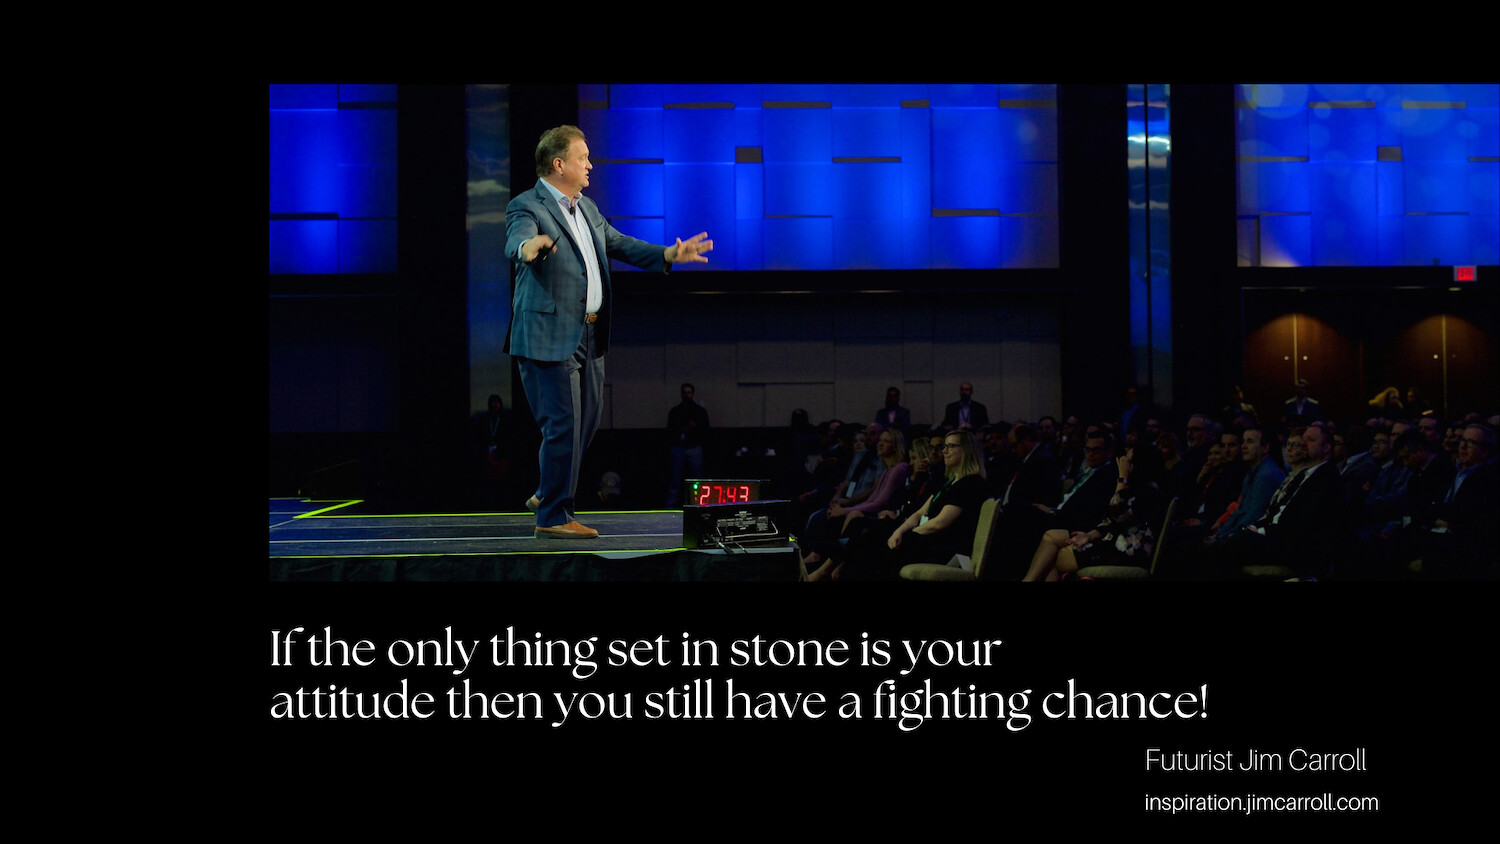 "If the only thing set in stone is your attitude then you still have a fighting chance!" - Futurist Jim Carroll